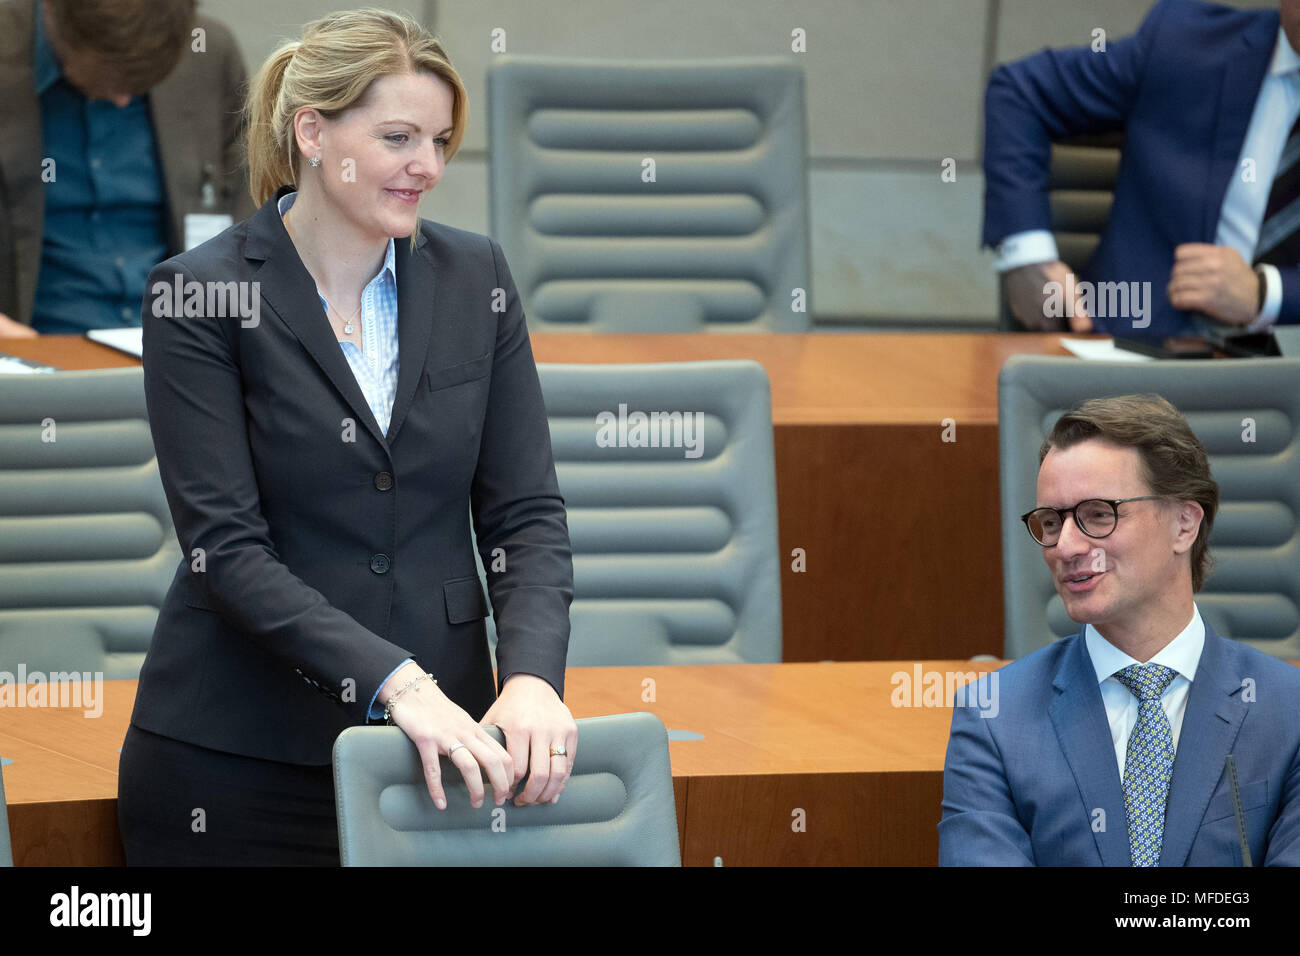 25 April 2018, Germany, Duesseldorf: The Minister for Environment, Nature, Agriculture, and Consumer Protection of the state of North Christina Schulze Foecking of the Christian Democratic Union (CDU), and Minister for